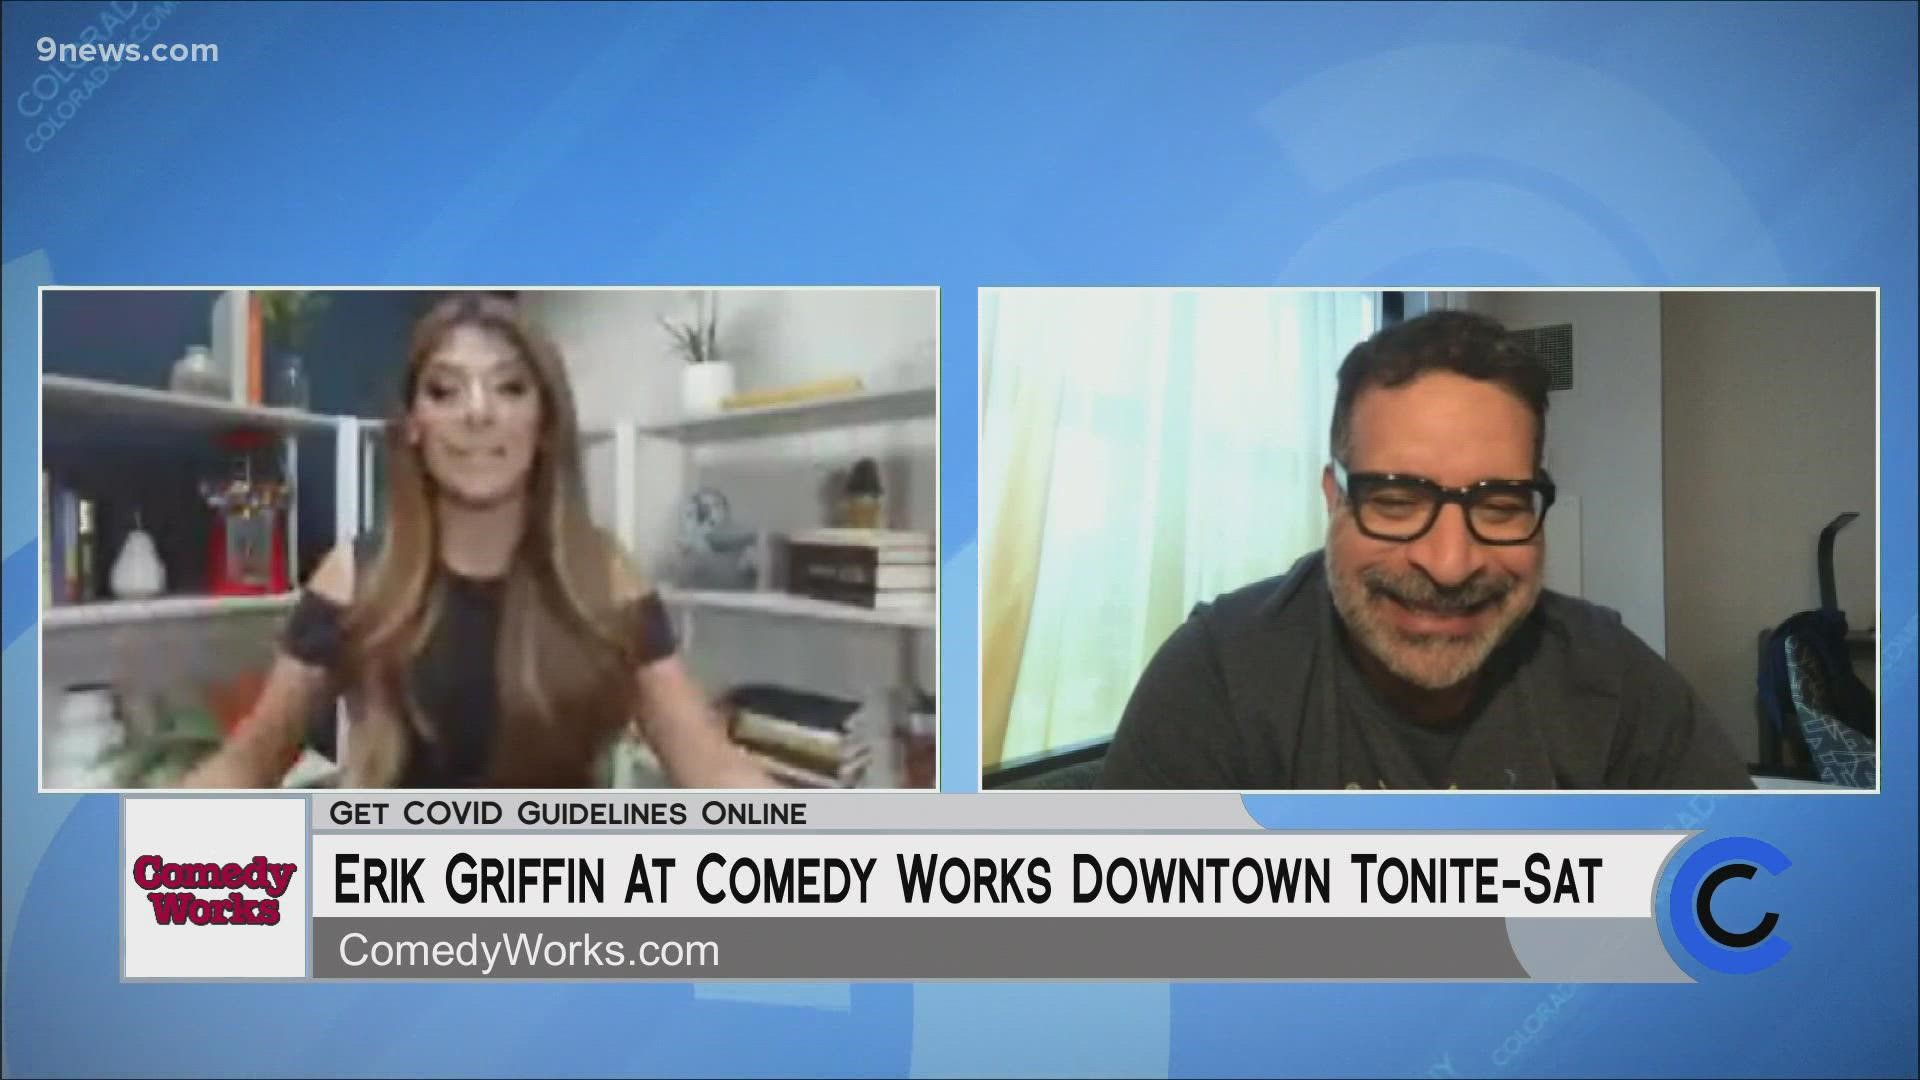 Get tickets for Erik Griffin or any of the great comedians coming through Comedy Works at ComedyWorks.com.